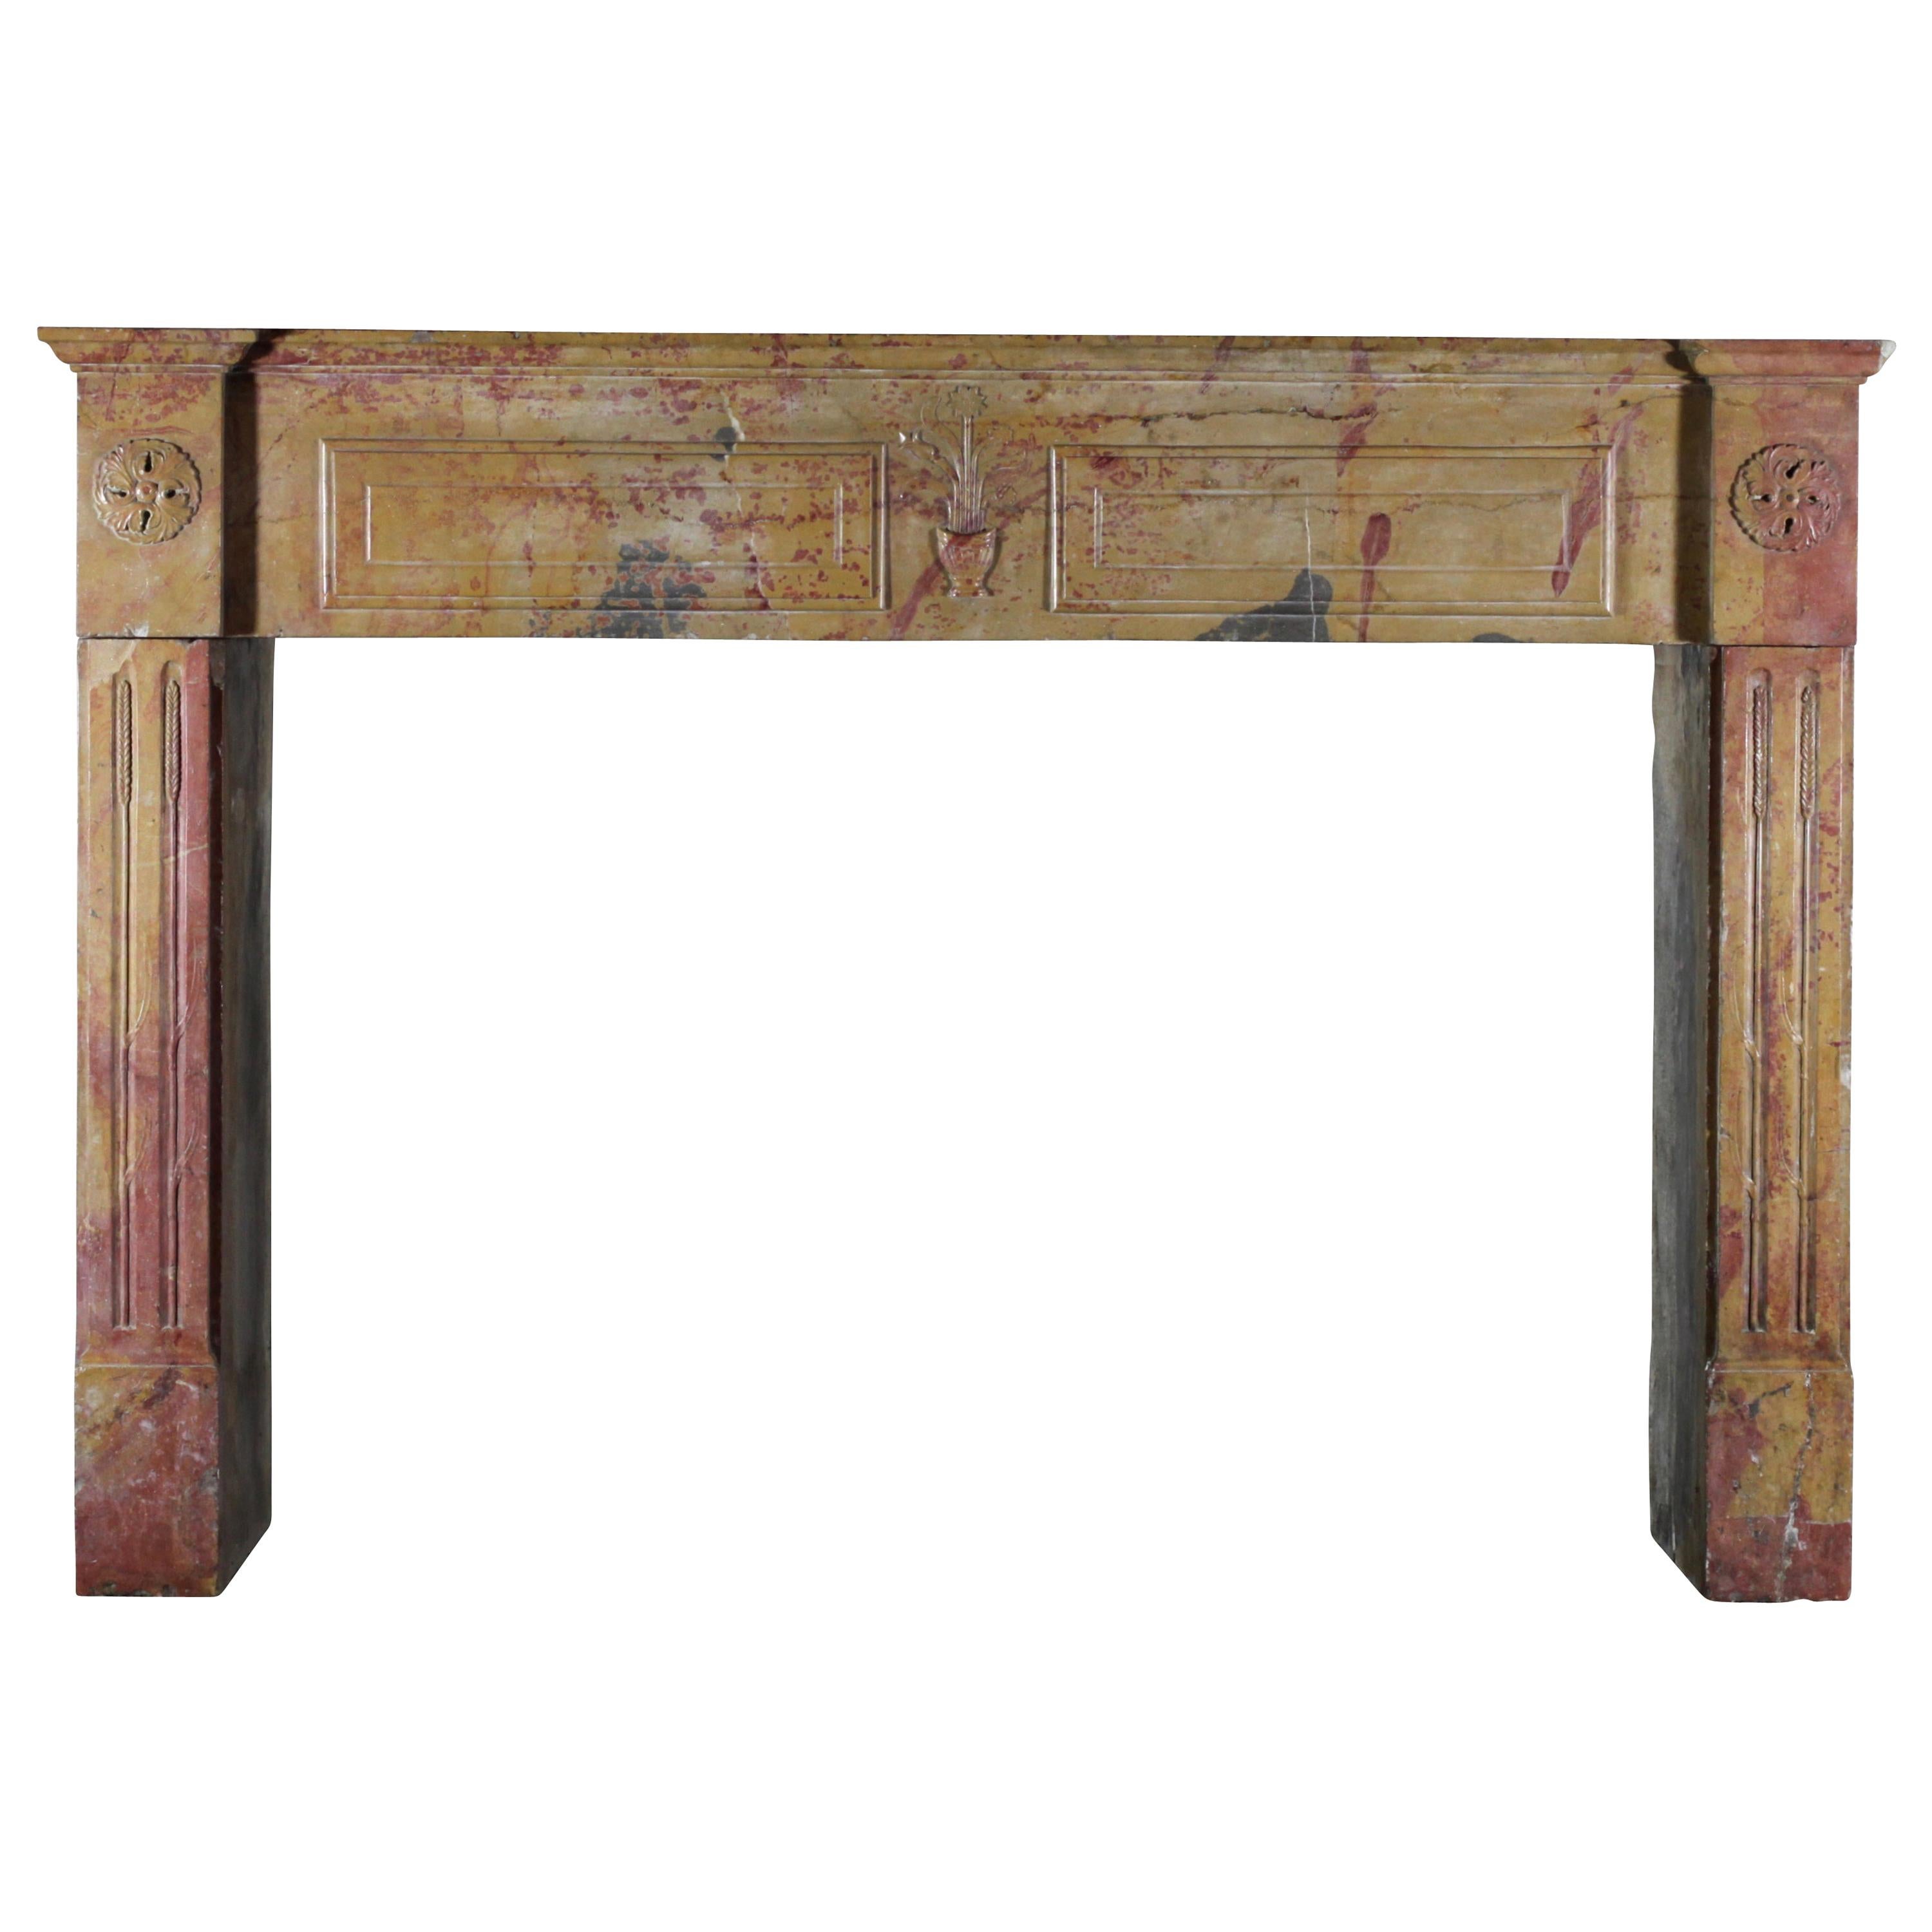 Original French Directoire Period Vintage Fireplace Surround Designed by Nature